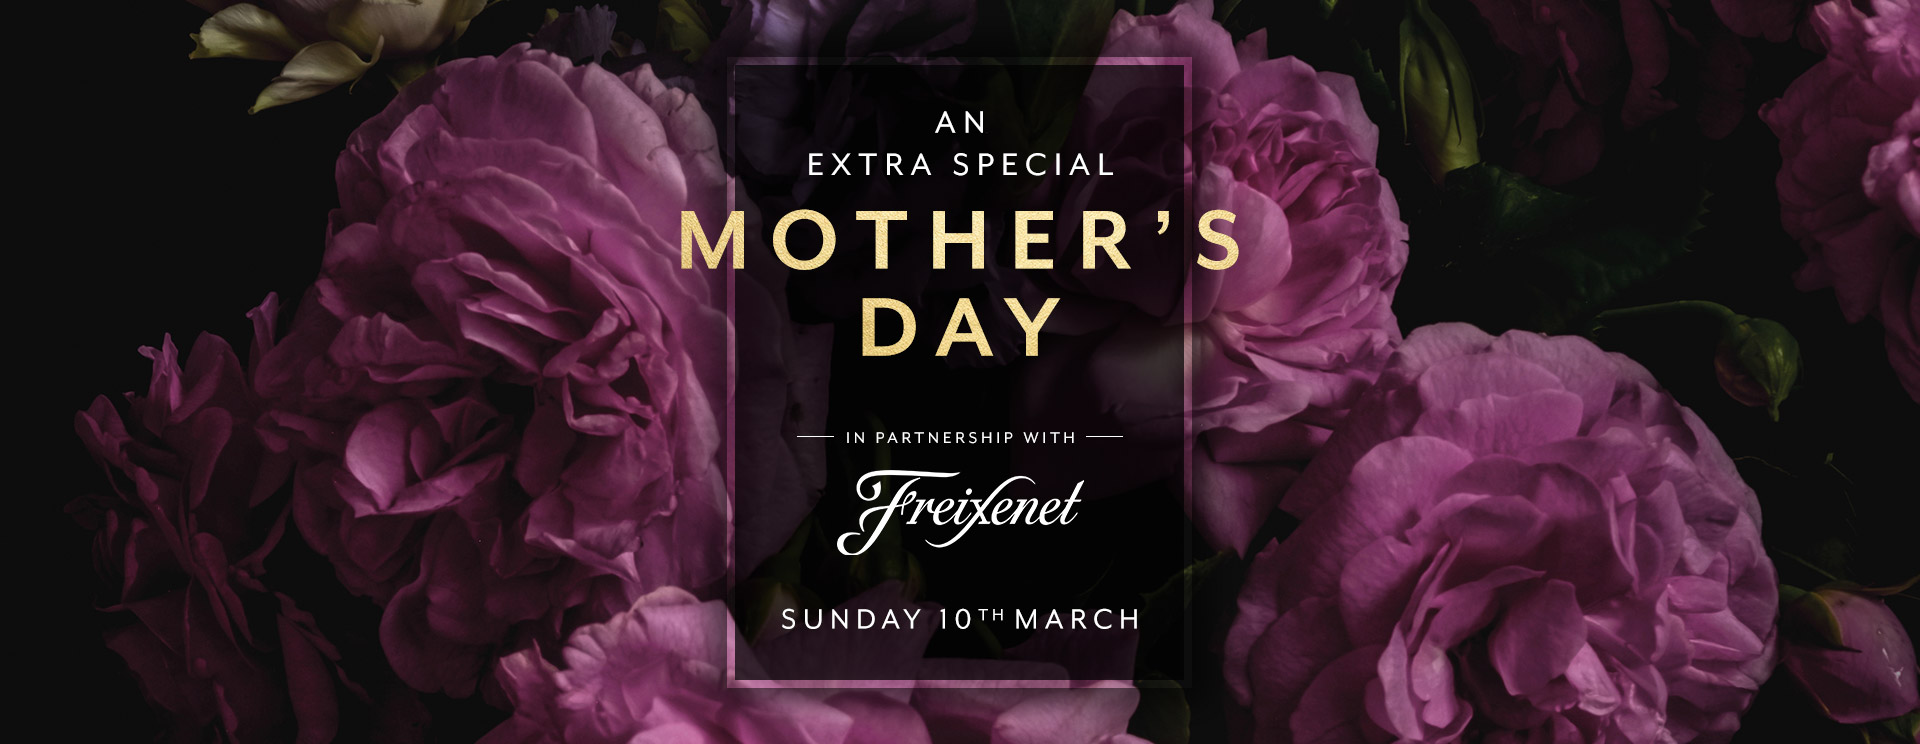 Mother’s Day menu/meal in Wickford